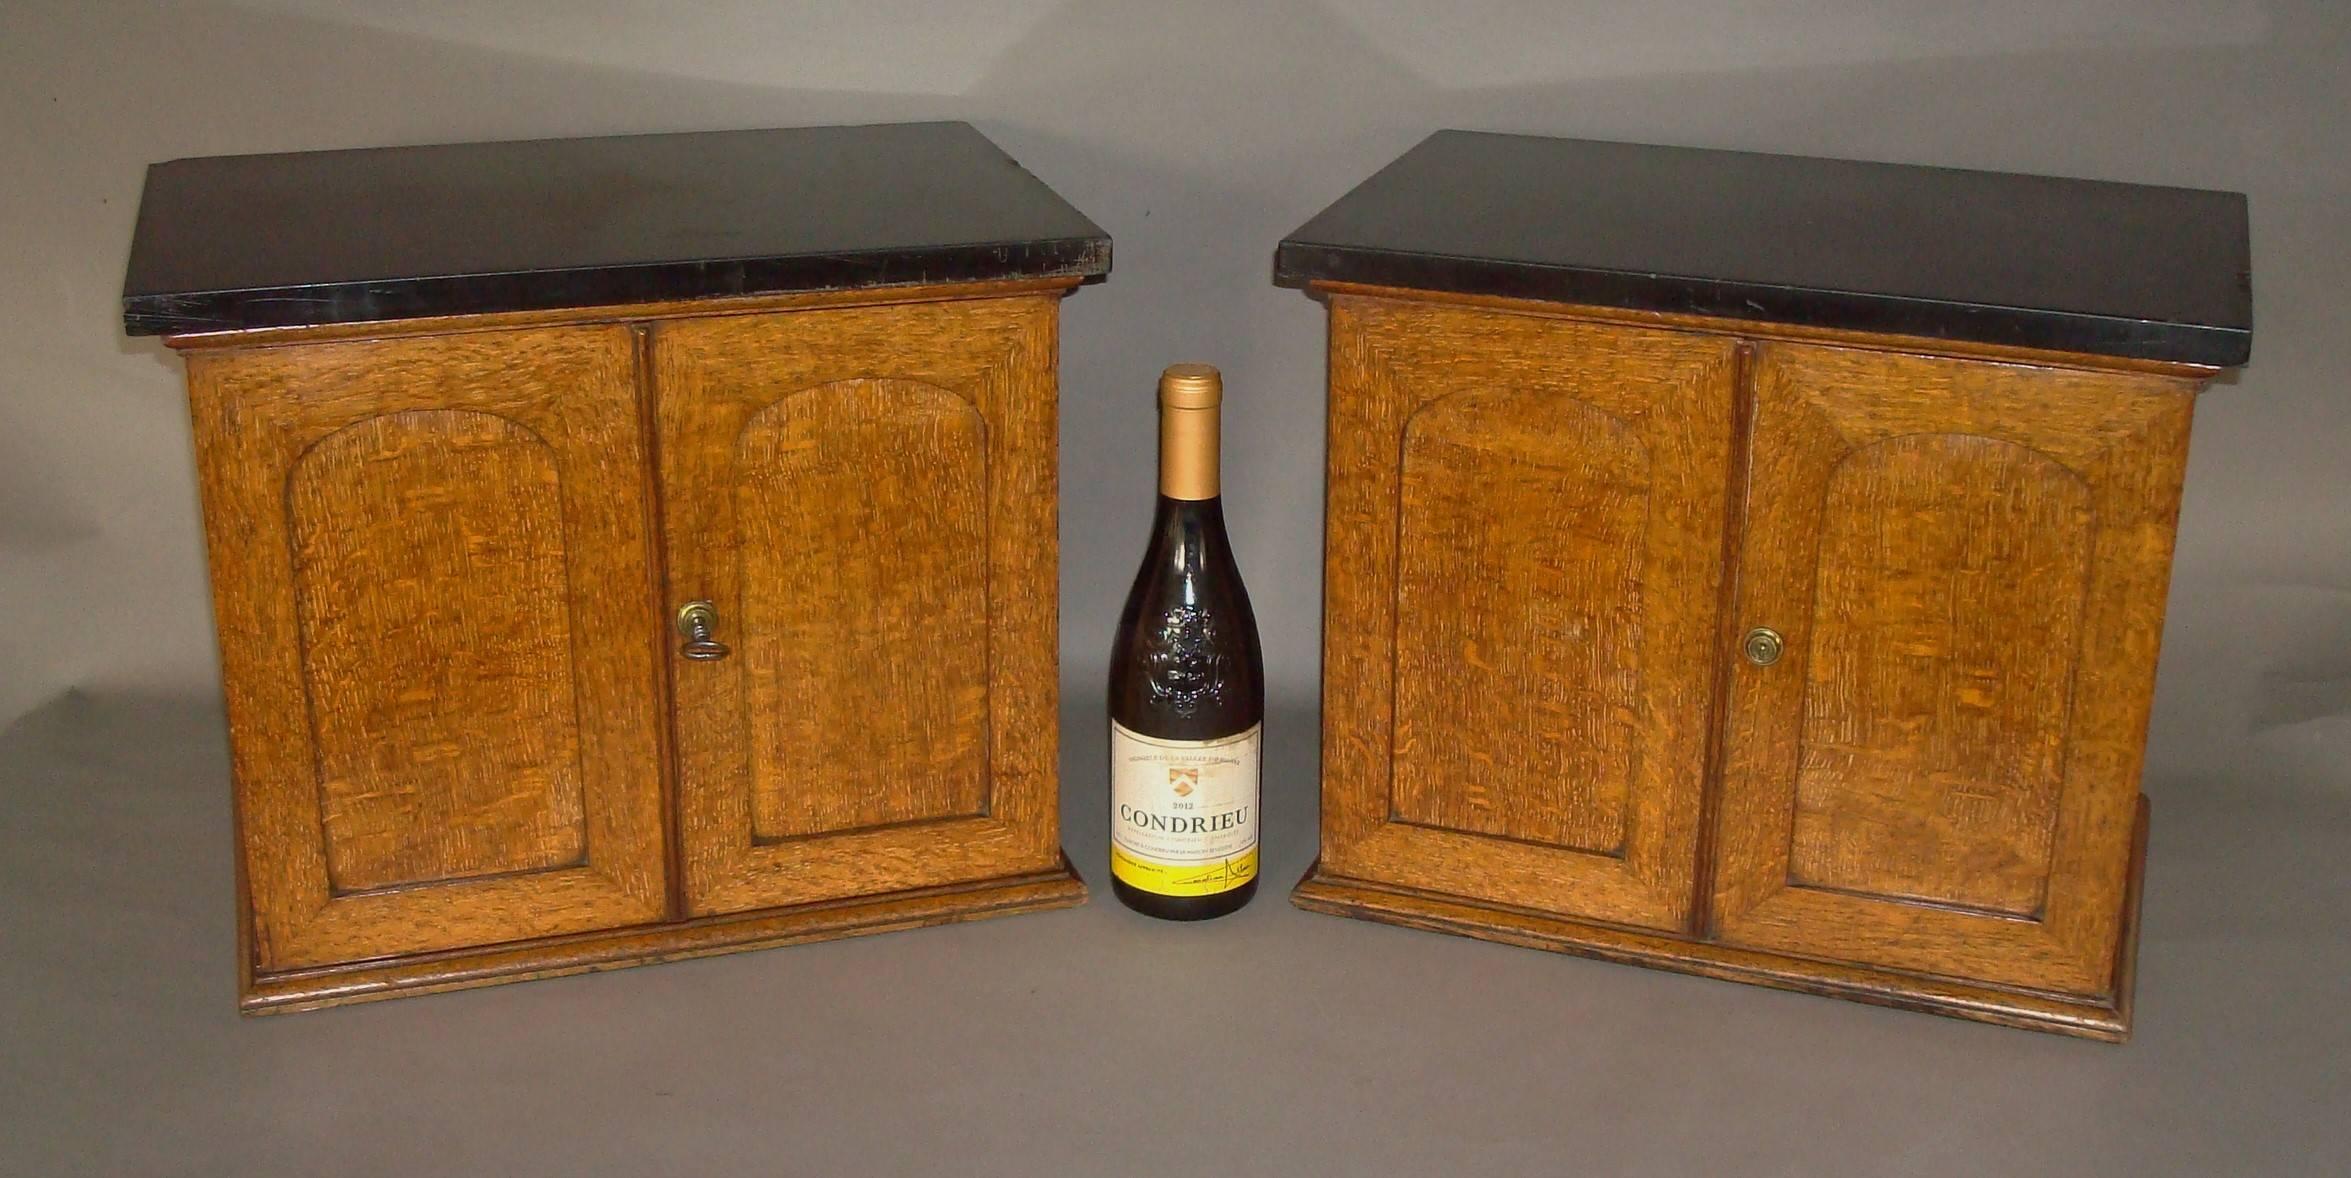 Good quality 19th century pair of golden oak table cabinets; the rectangular 'Belgian Black' marble tops, above a pair of arched paneled doors fitted with Bramah locks (stamped 'J Bramah, 124 Piccaddilly' with a crown). The mahogany interiors one